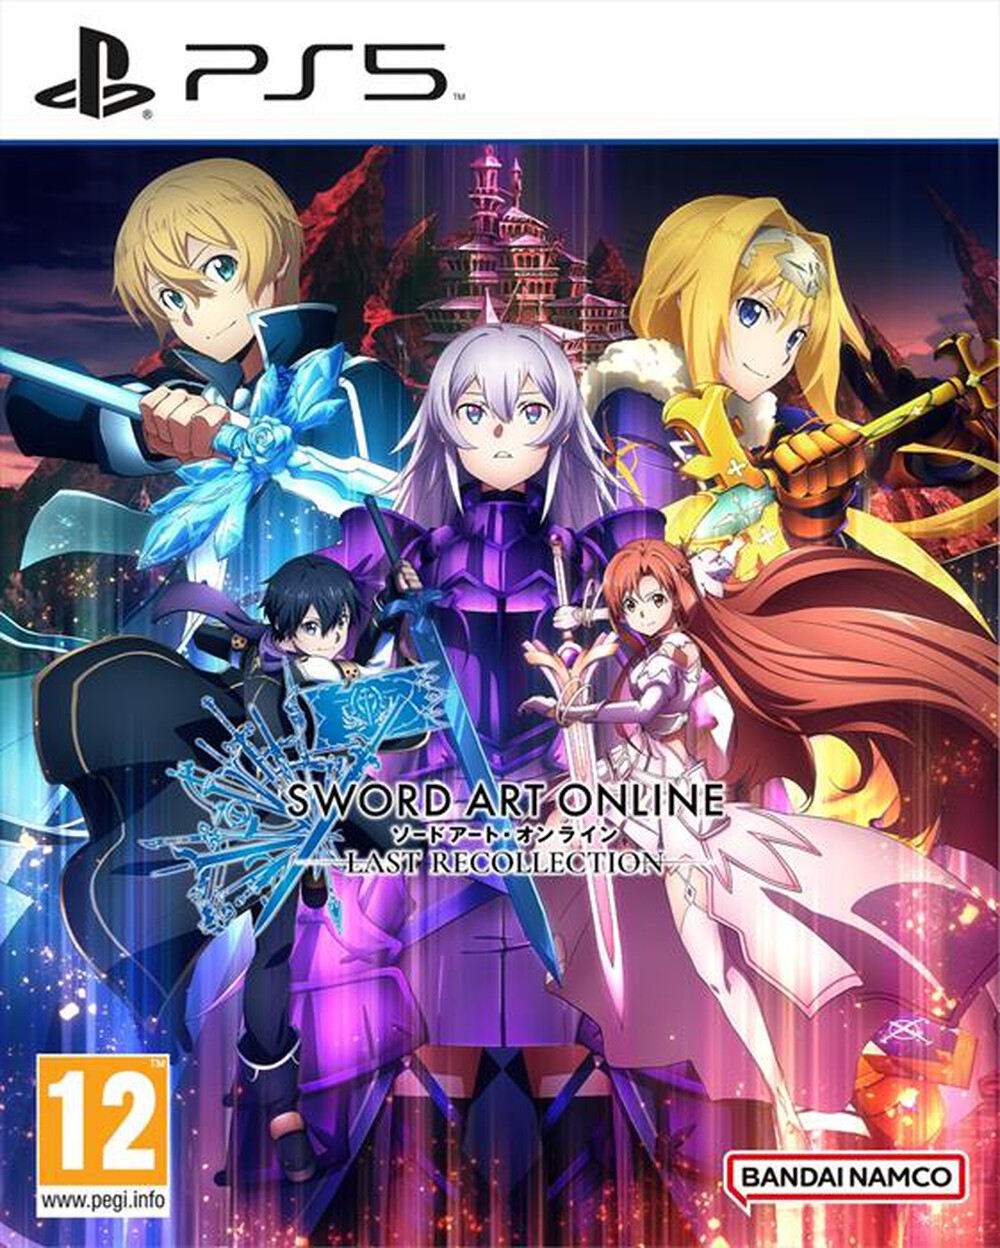 "NAMCO - SWORD ART ONLINE LAST RECOLLECTION PS5"